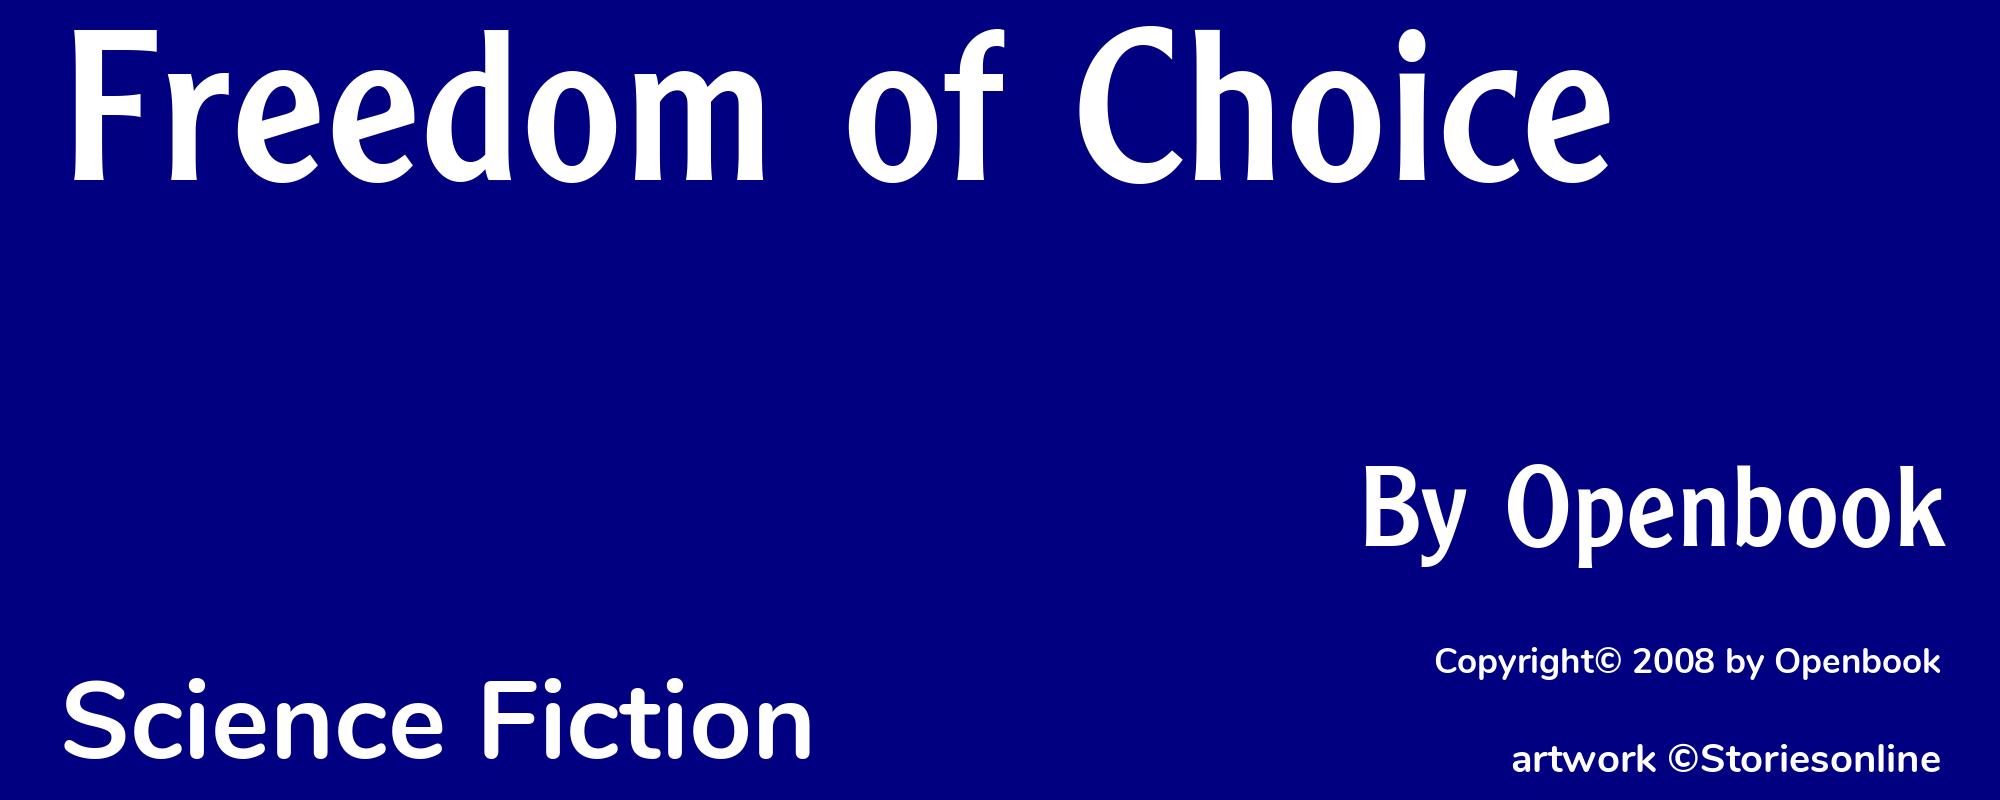 Freedom of Choice - Cover